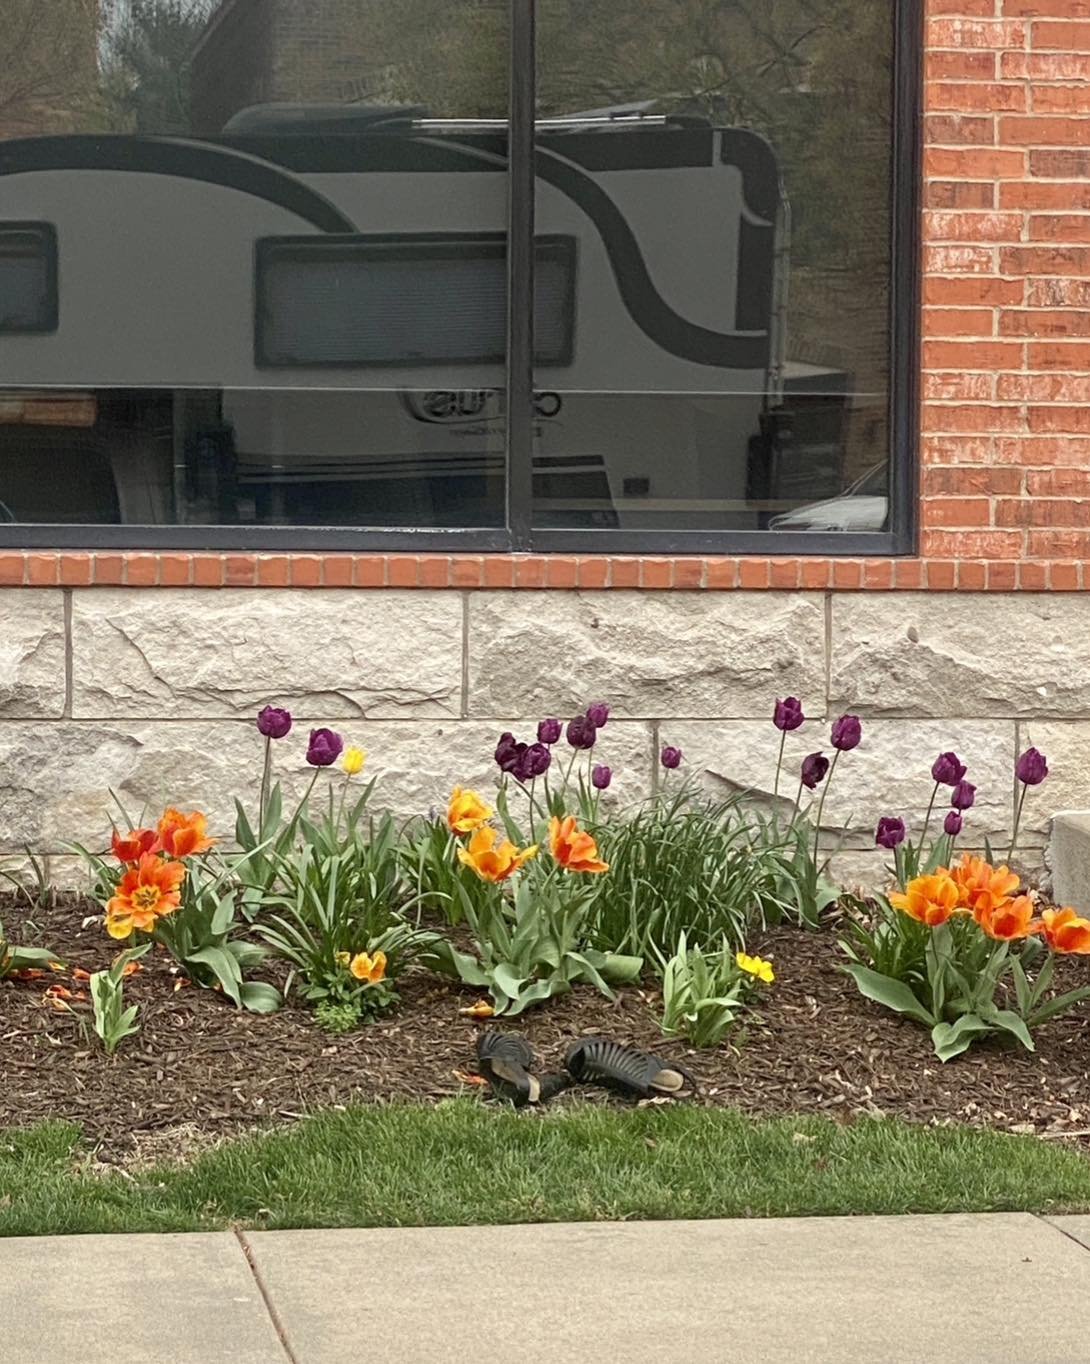 I&rsquo;ve got a lot of questions concerning these shoes left behind in the flower bed&hellip; 🤔 Maybe the flowers were just so pretty they were compelled to kick off their shoes and frolic down the street barefoot! 💃🏻🕺🏼🌷👠 #vagabonds #travelgr